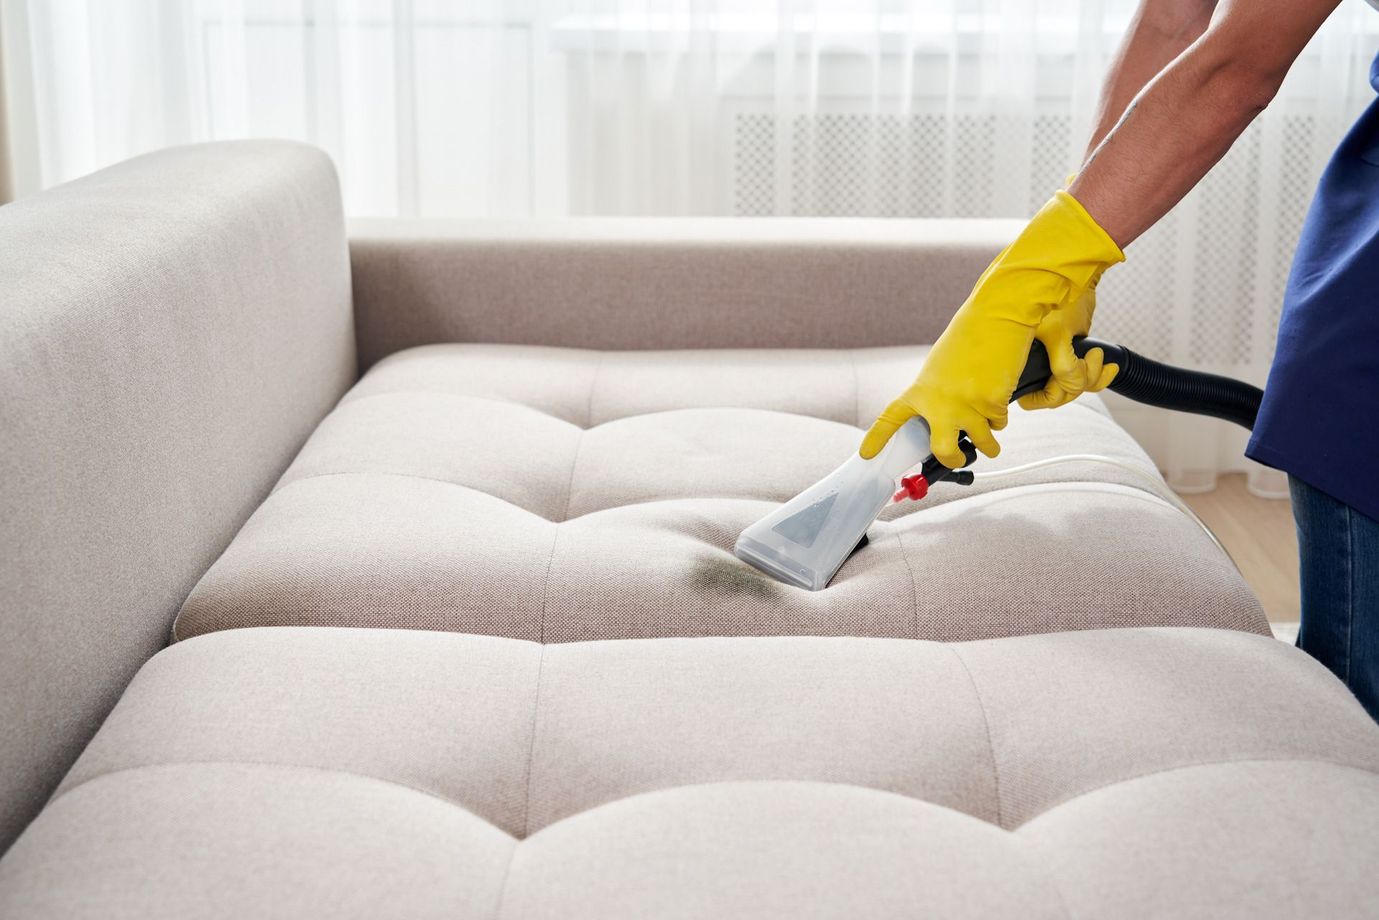 A person wearing yellow gloves is cleaning a couch